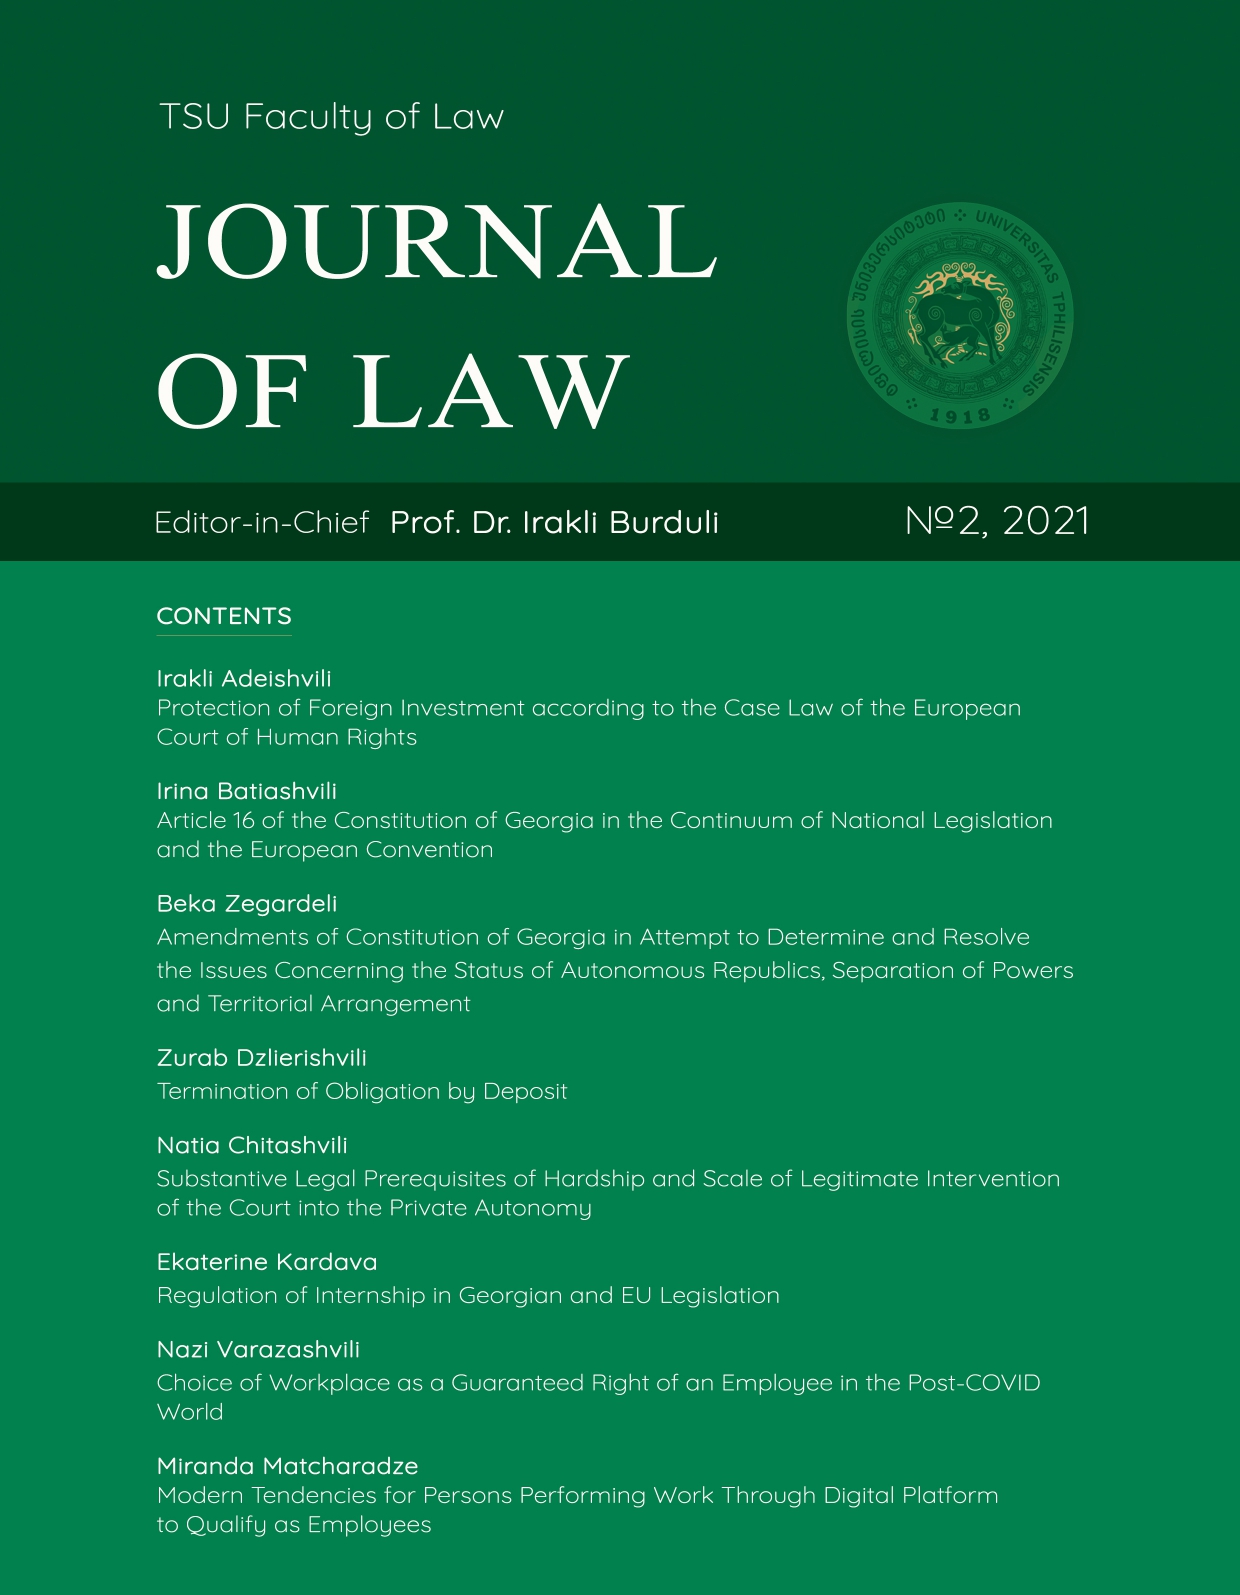 Journal of Law